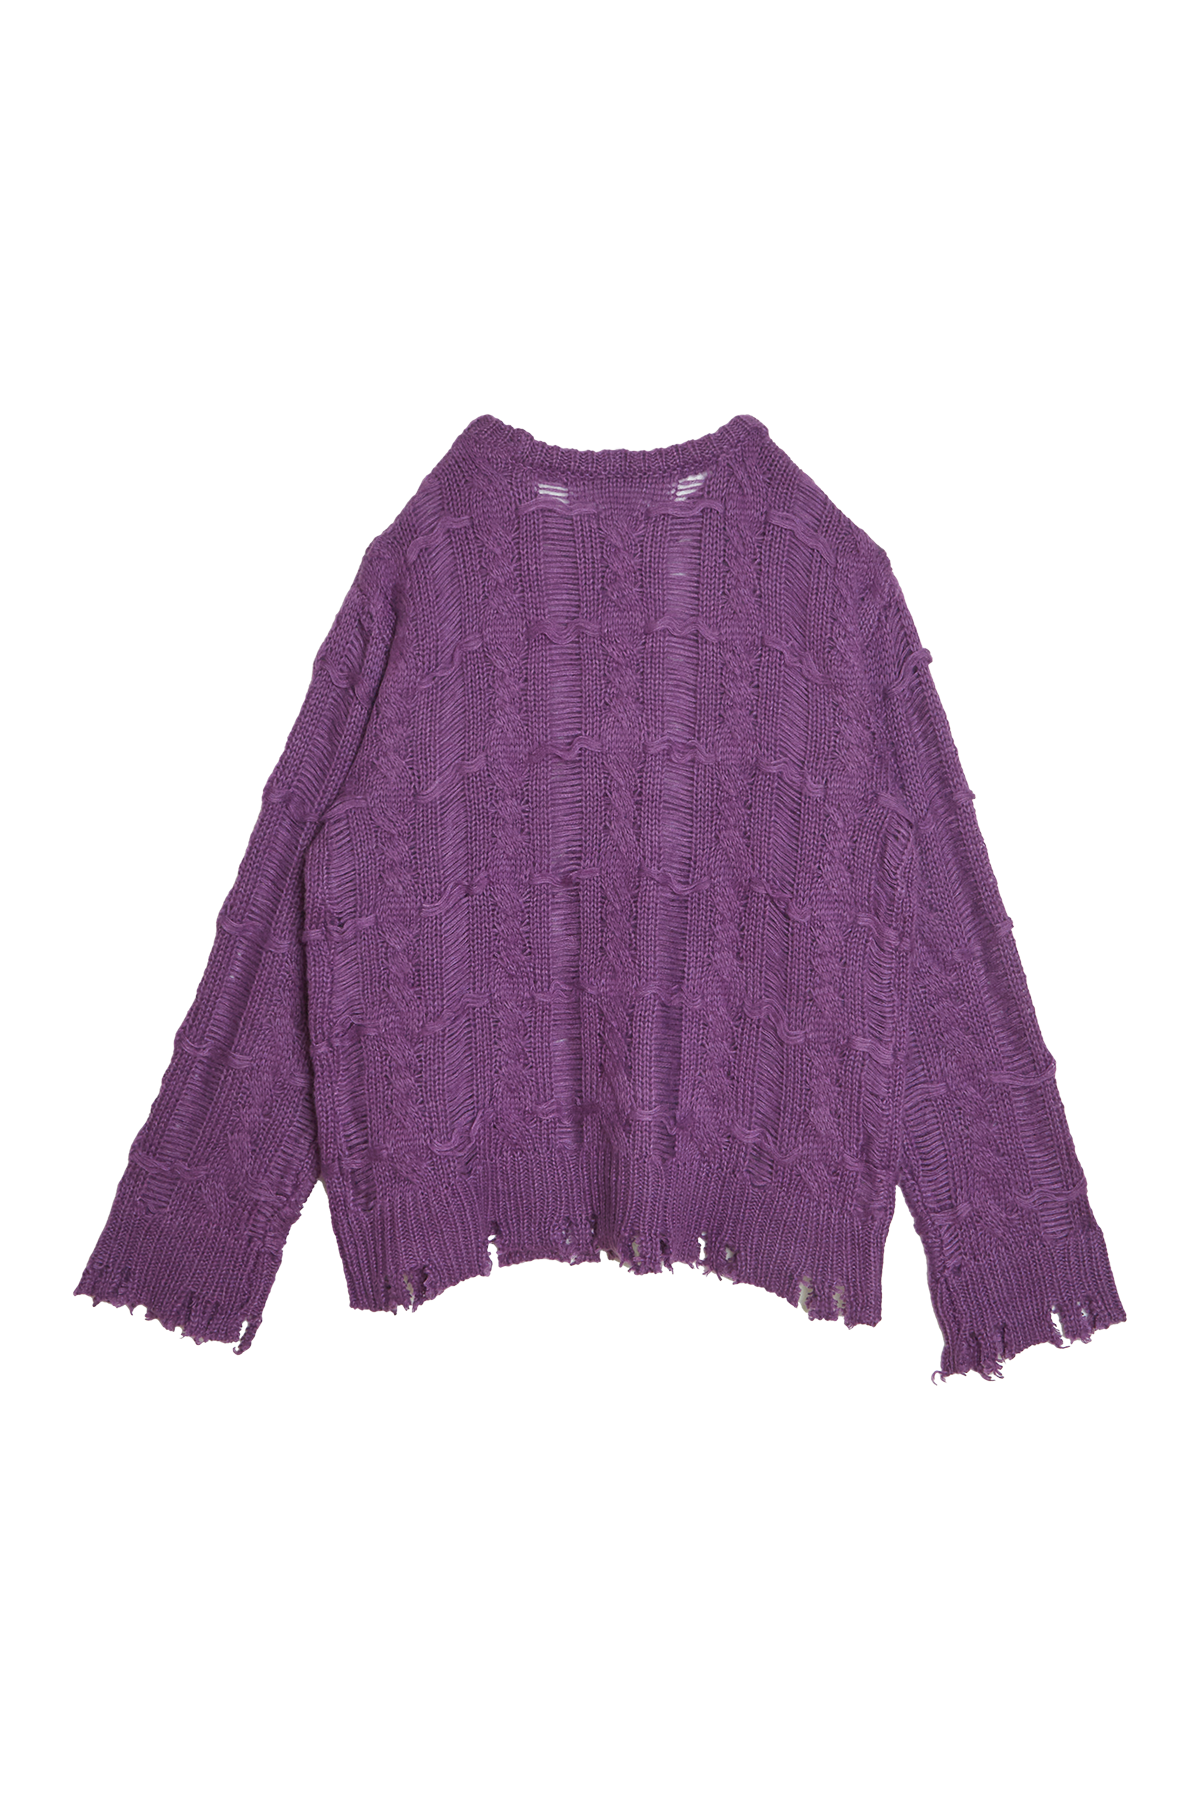 Different Wreck Knit Top / Purple